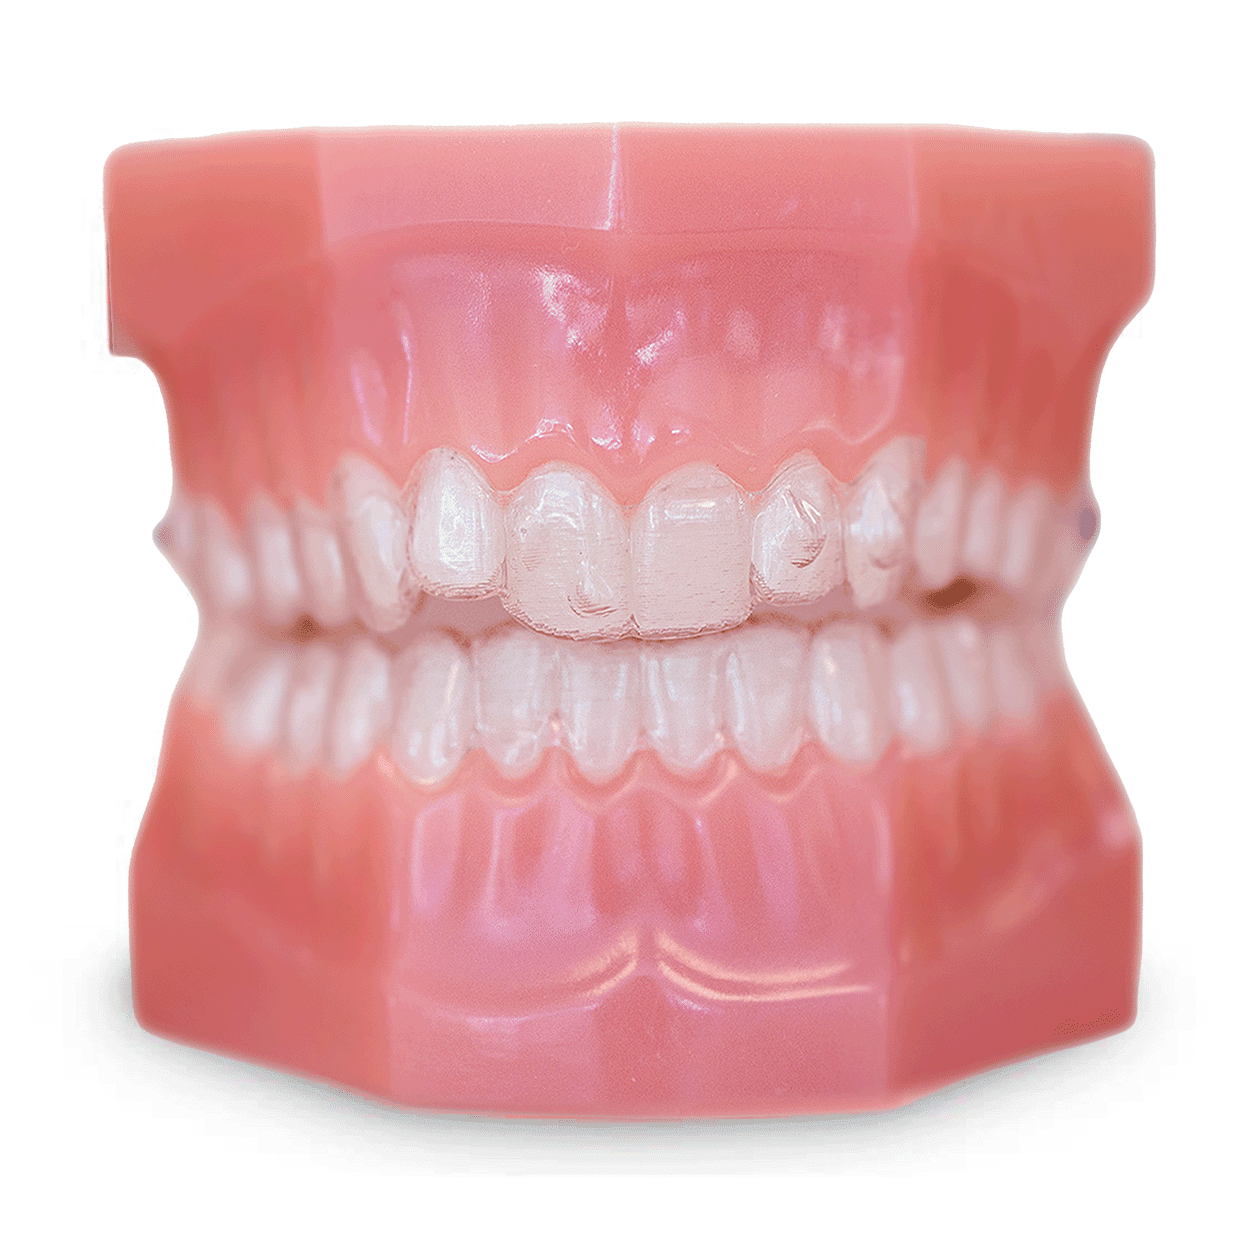 Clear-Aligners